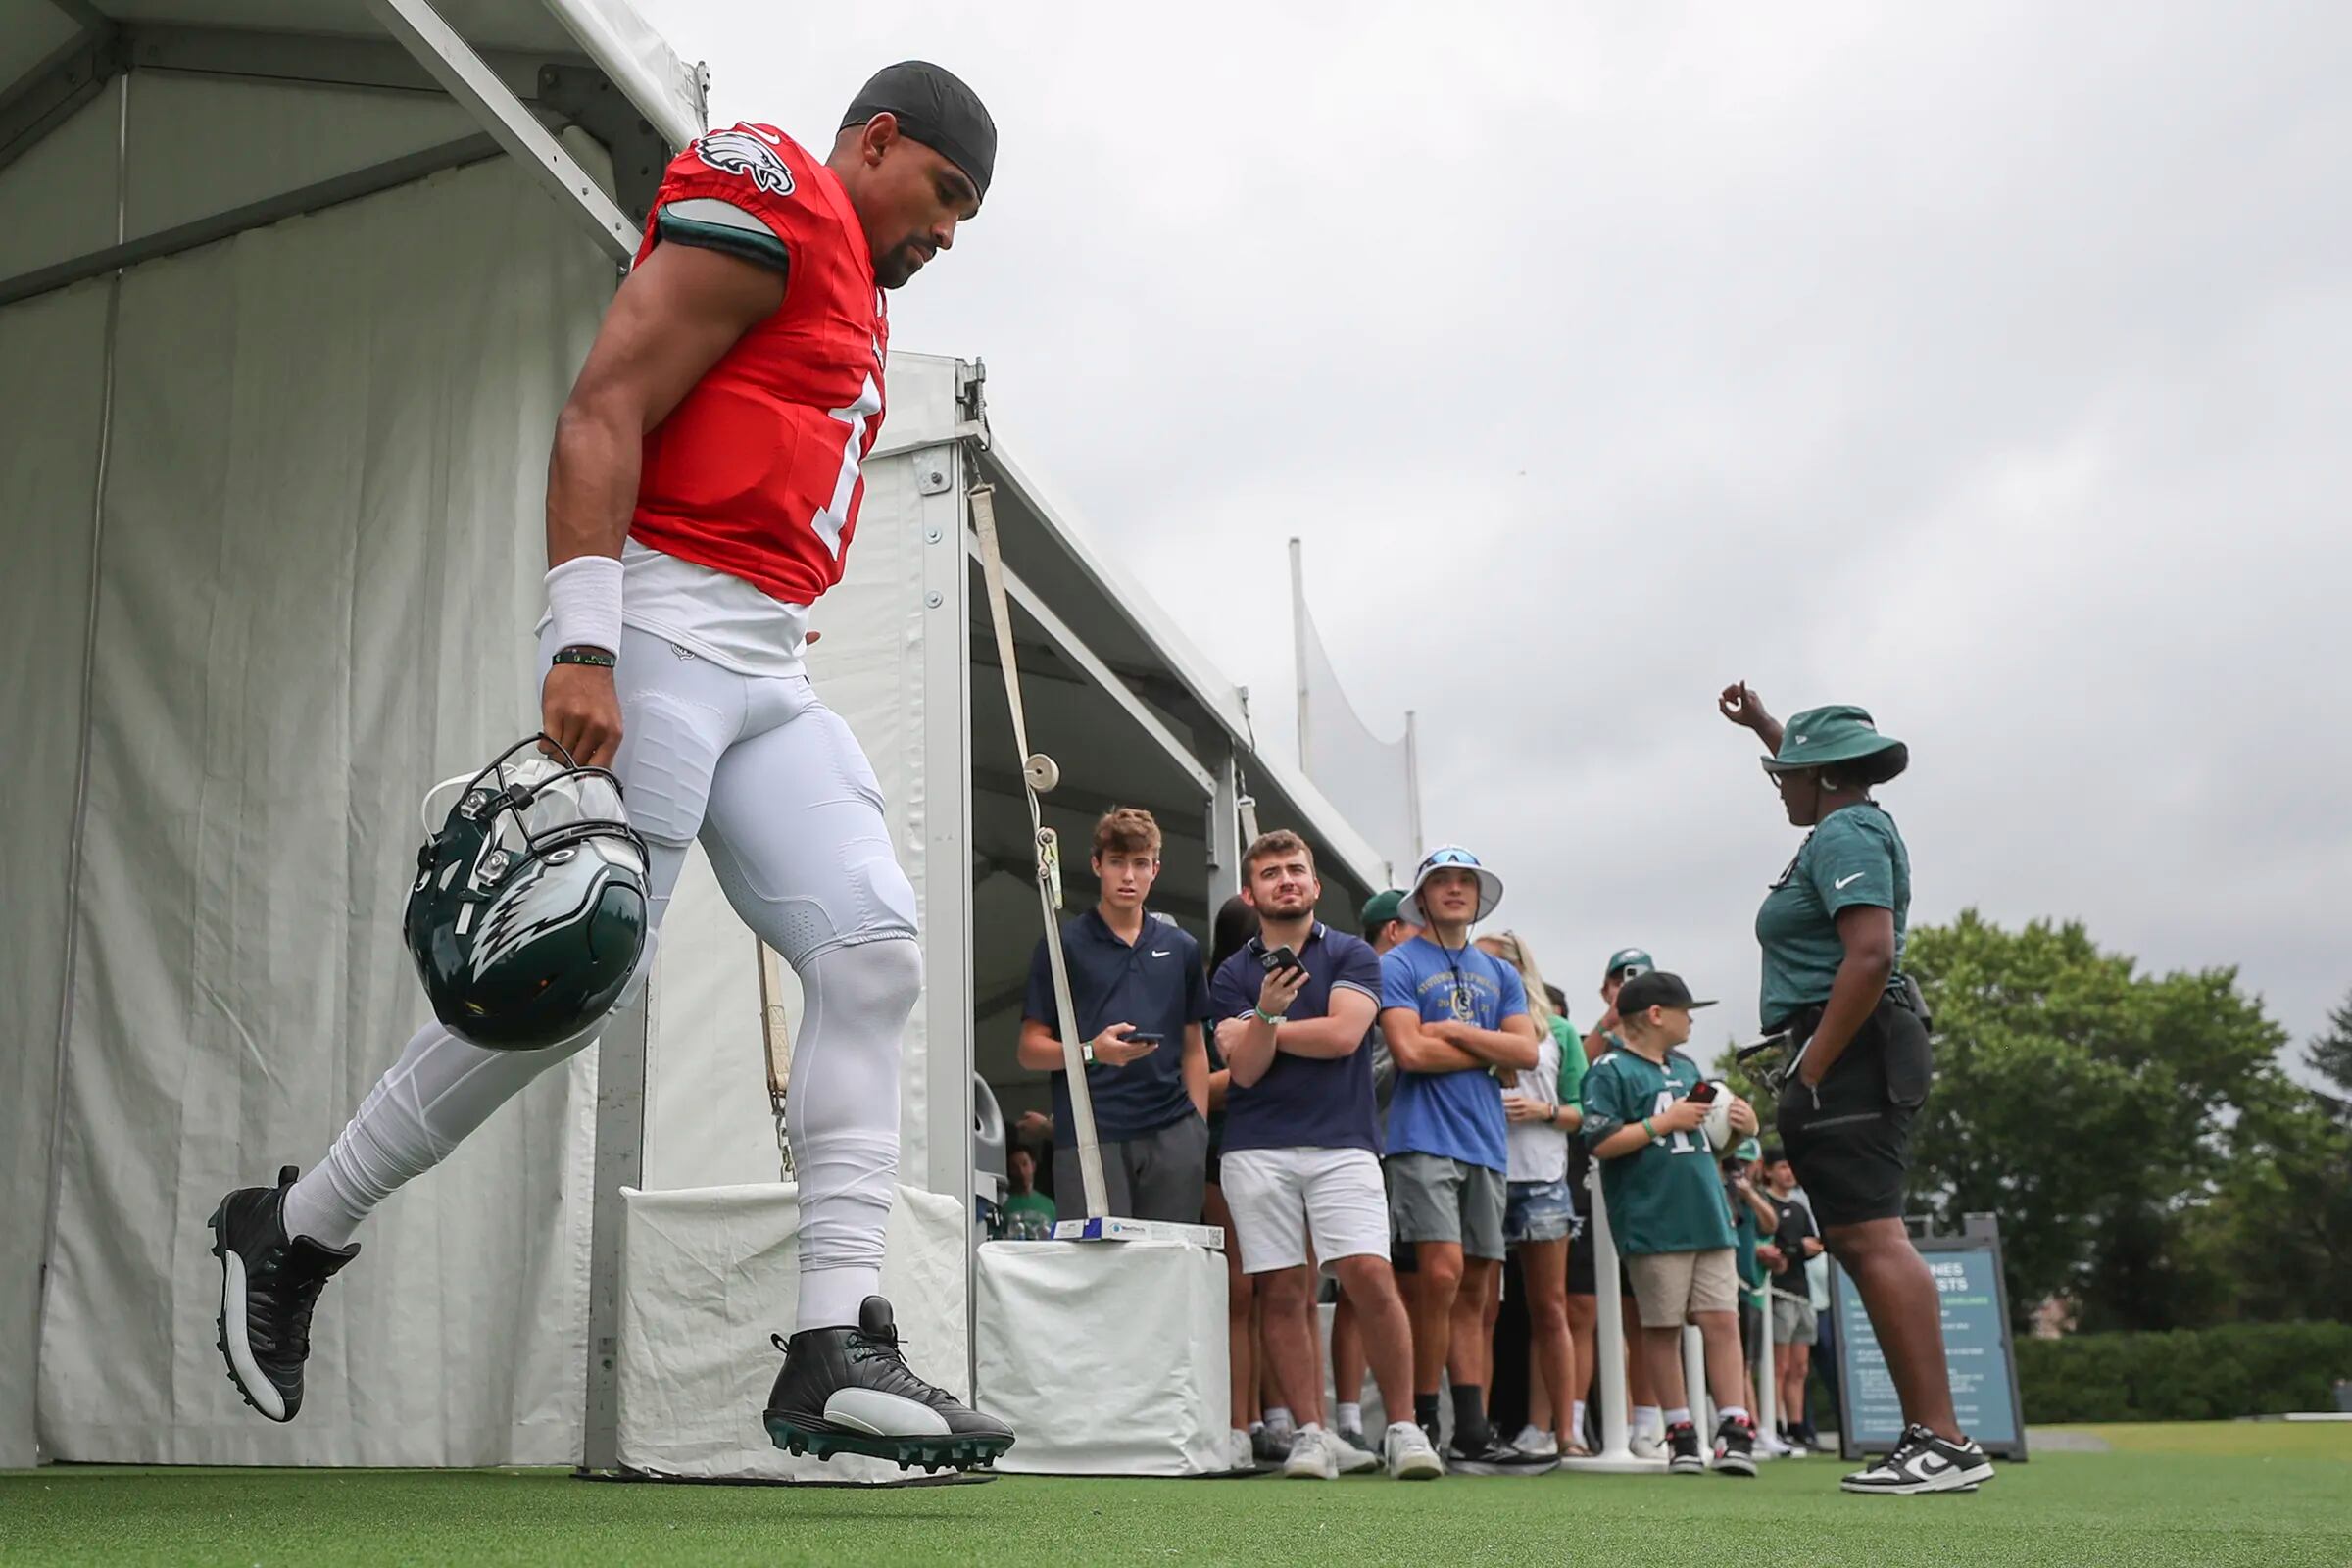 Photos from the second Saturday of Eagles training camp